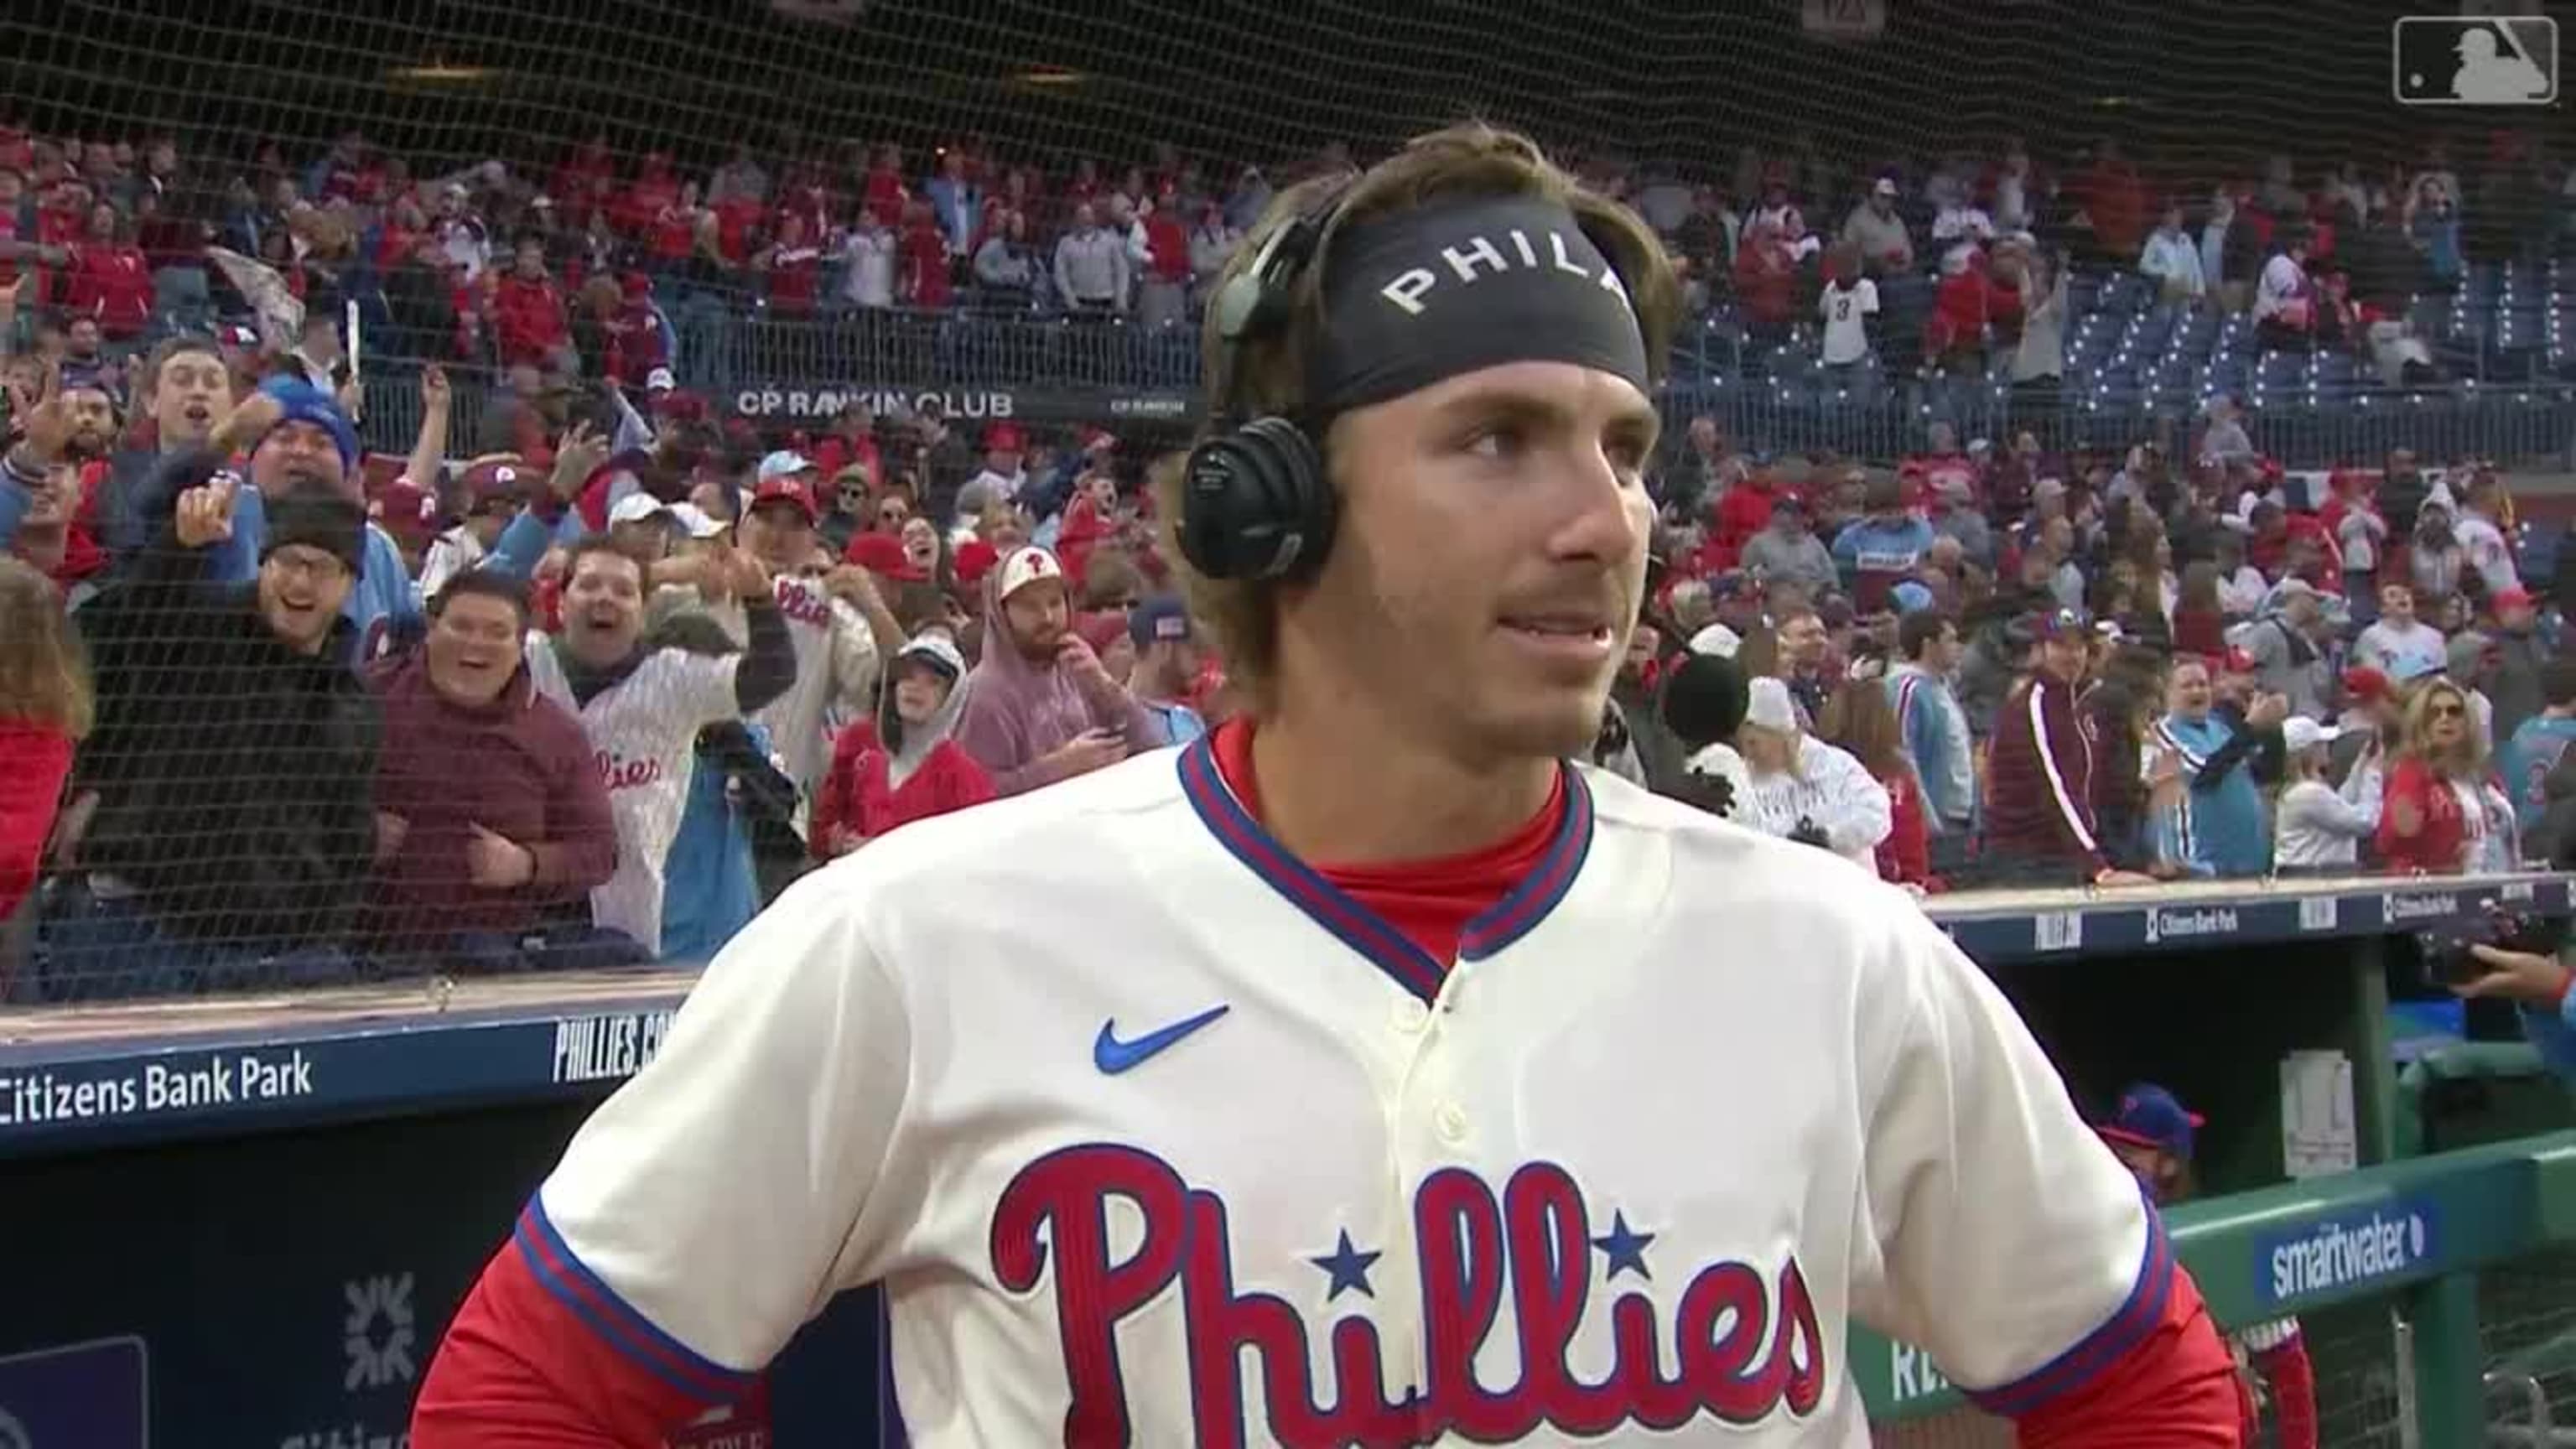 Photos from the Phillies walk-off win